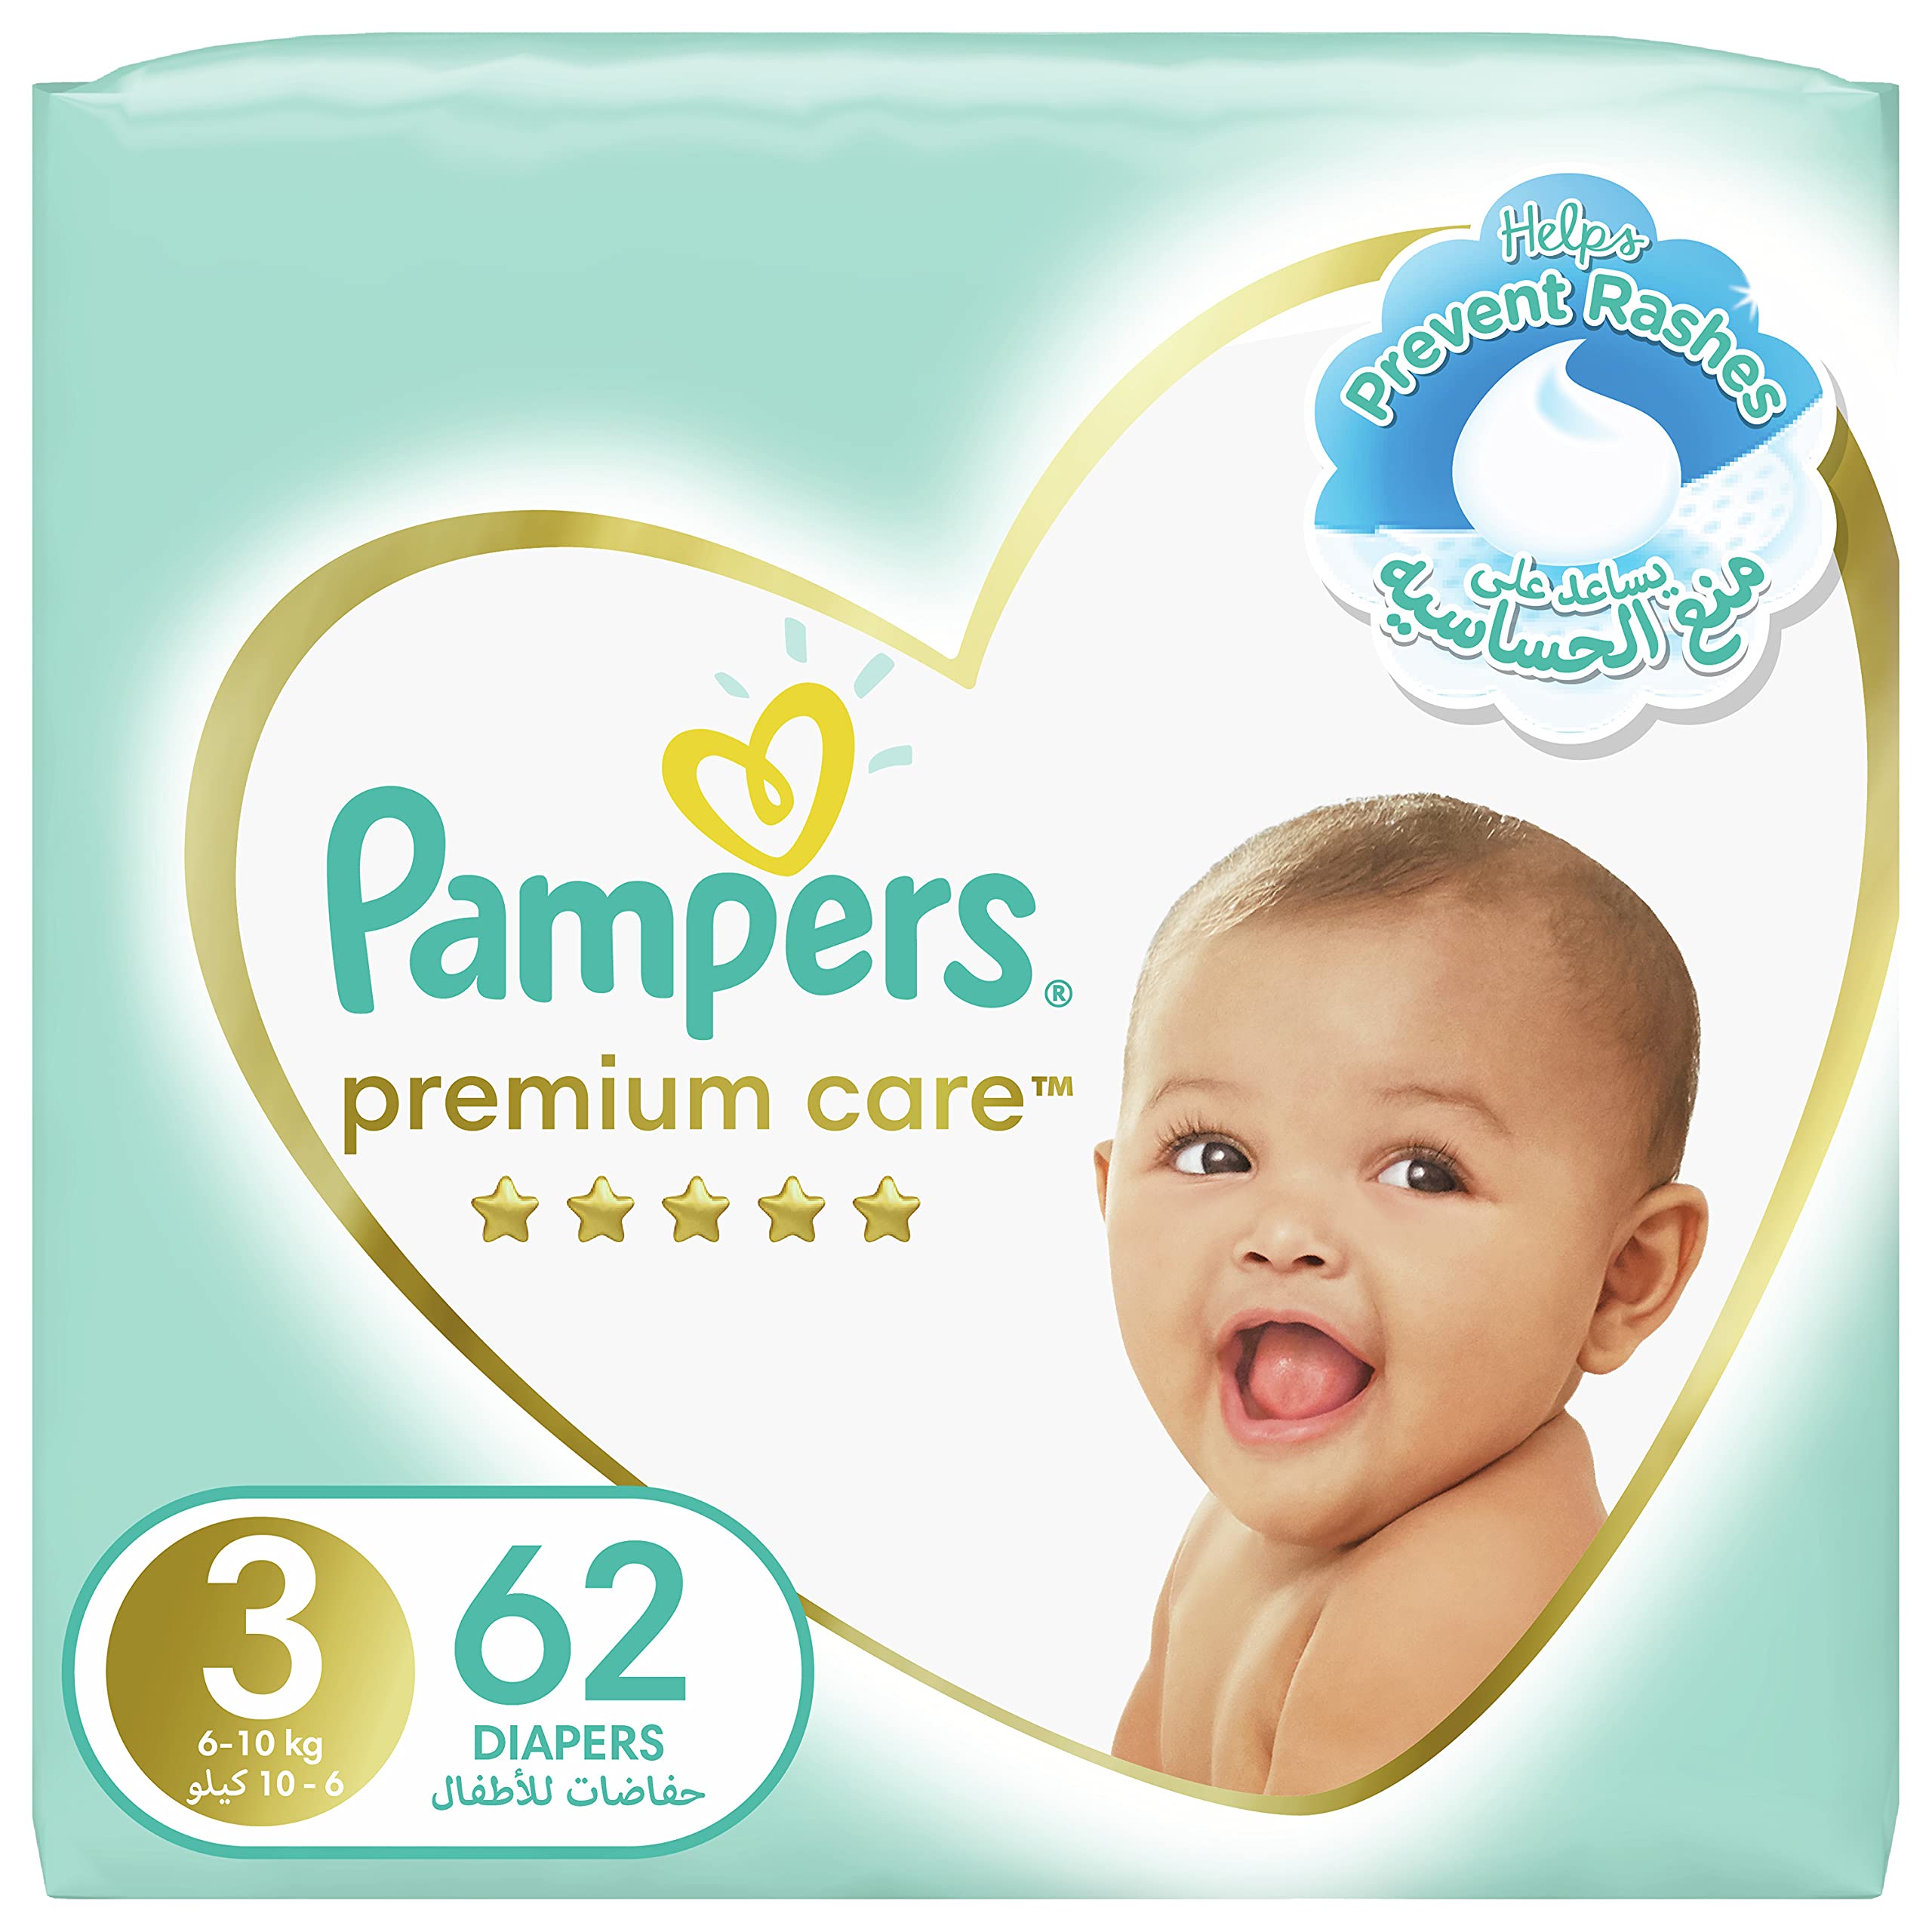 pure protection pampers